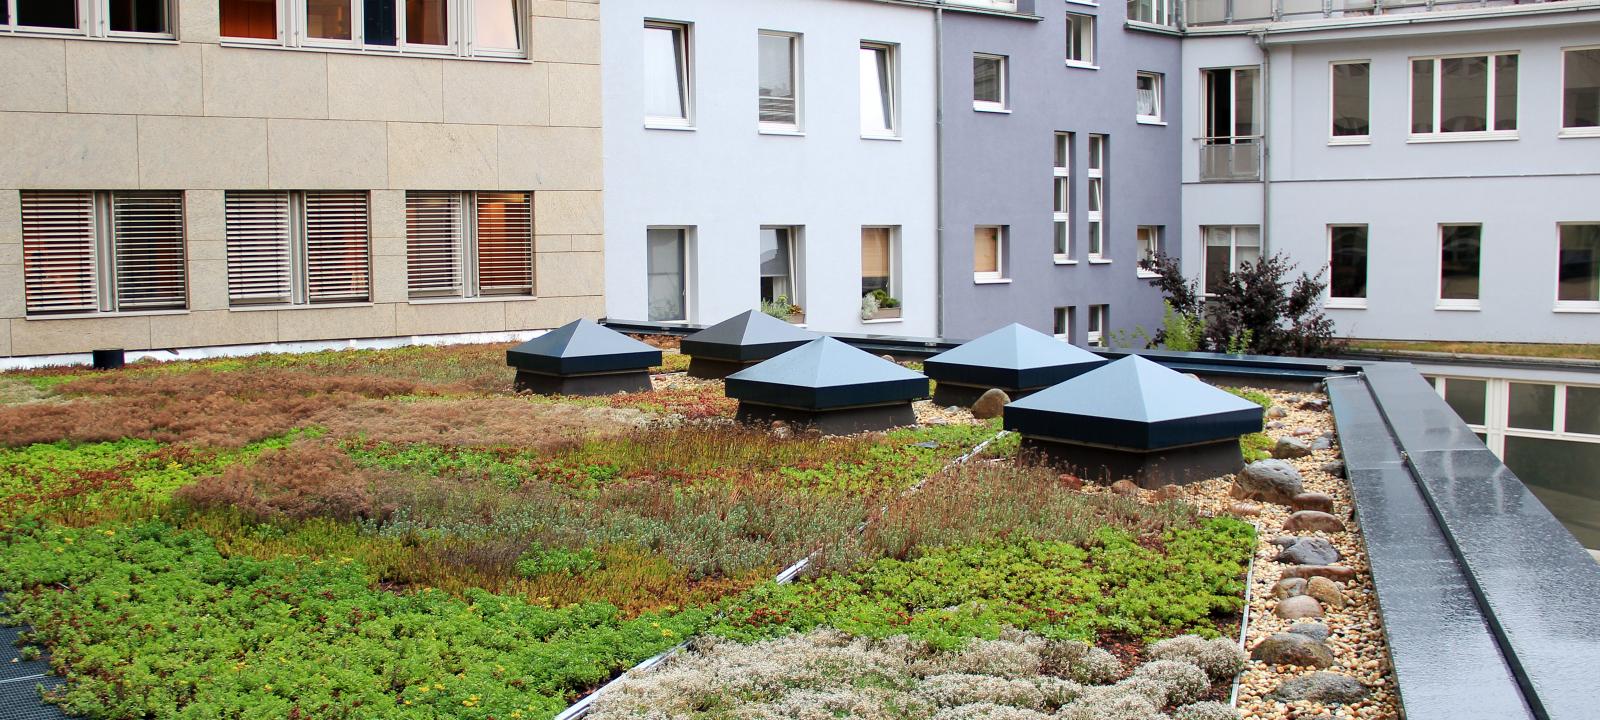 Green roof during rainfall